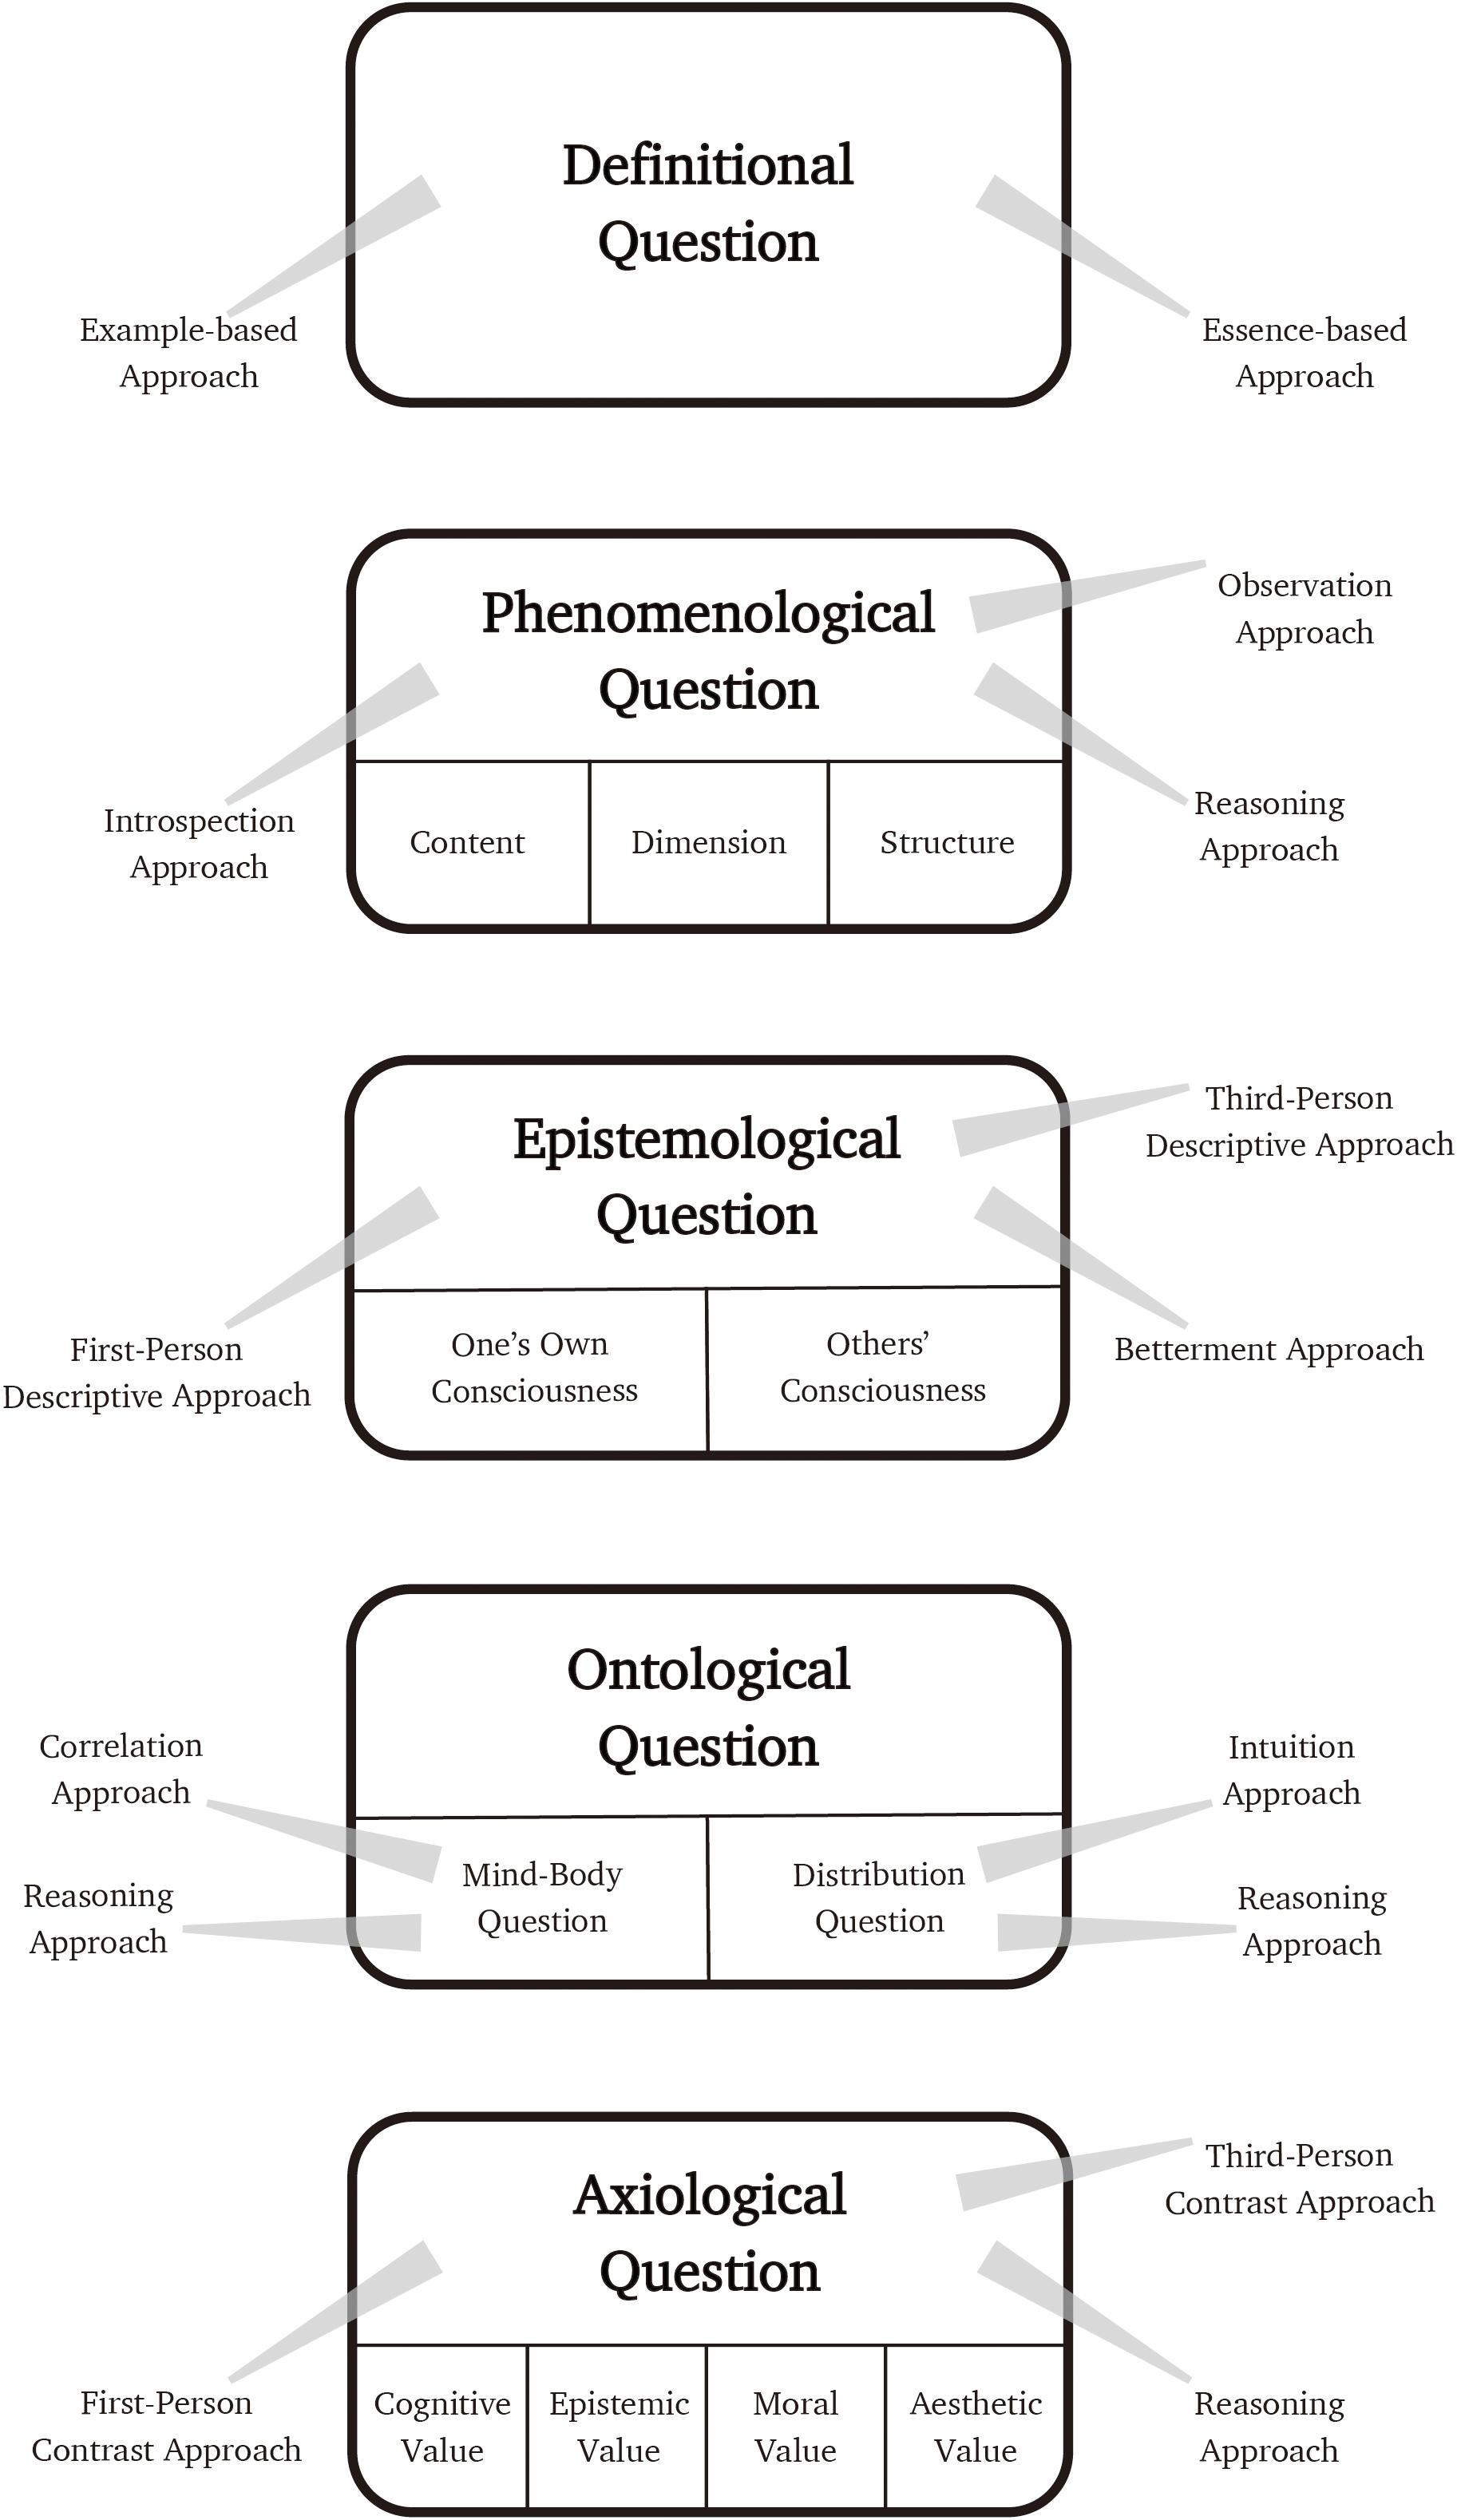 critical consciousness research questions